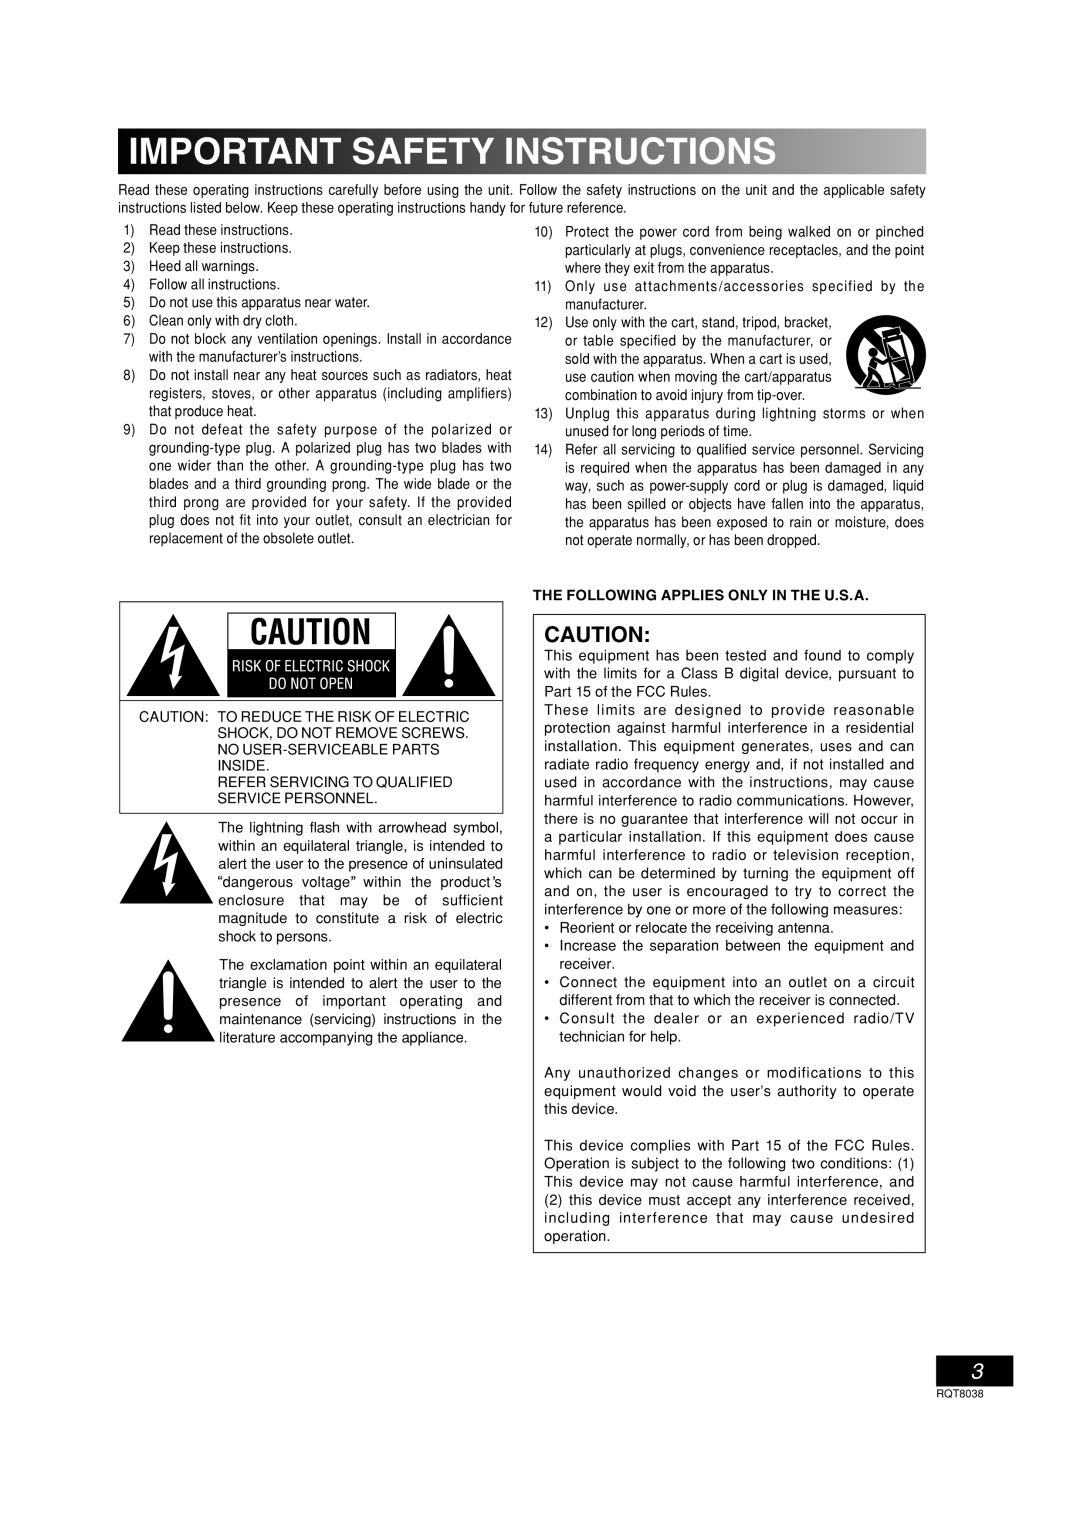 Panasonic SC-PM41 important safety instructions Important Safety Instructions, The Following Applies Only In The U.S.A 